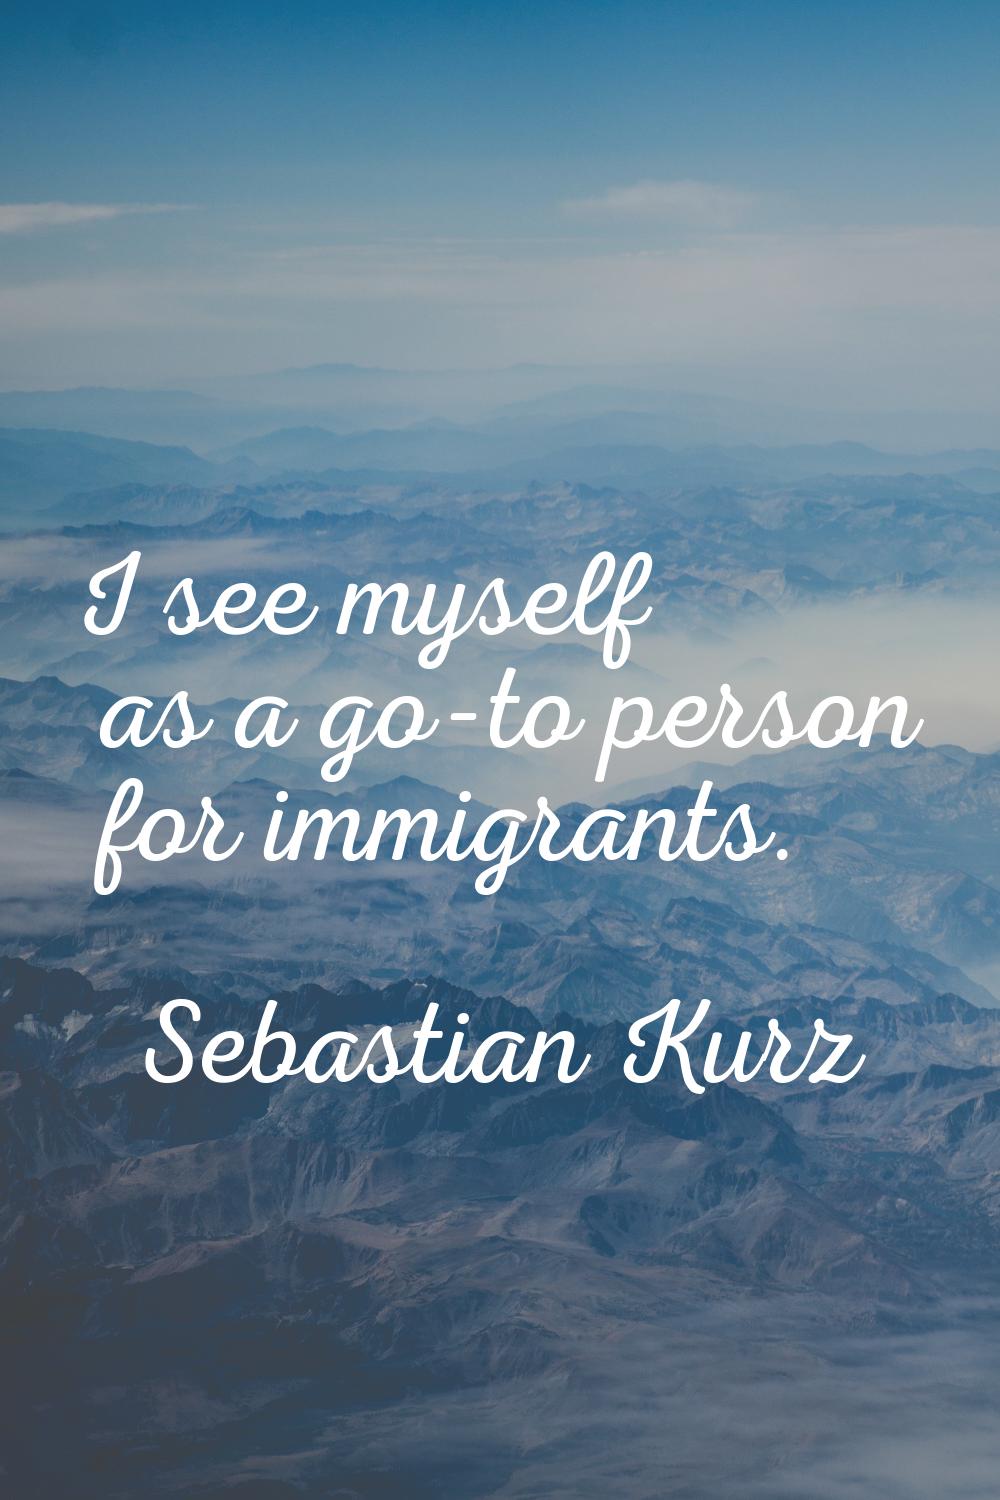 I see myself as a go-to person for immigrants.